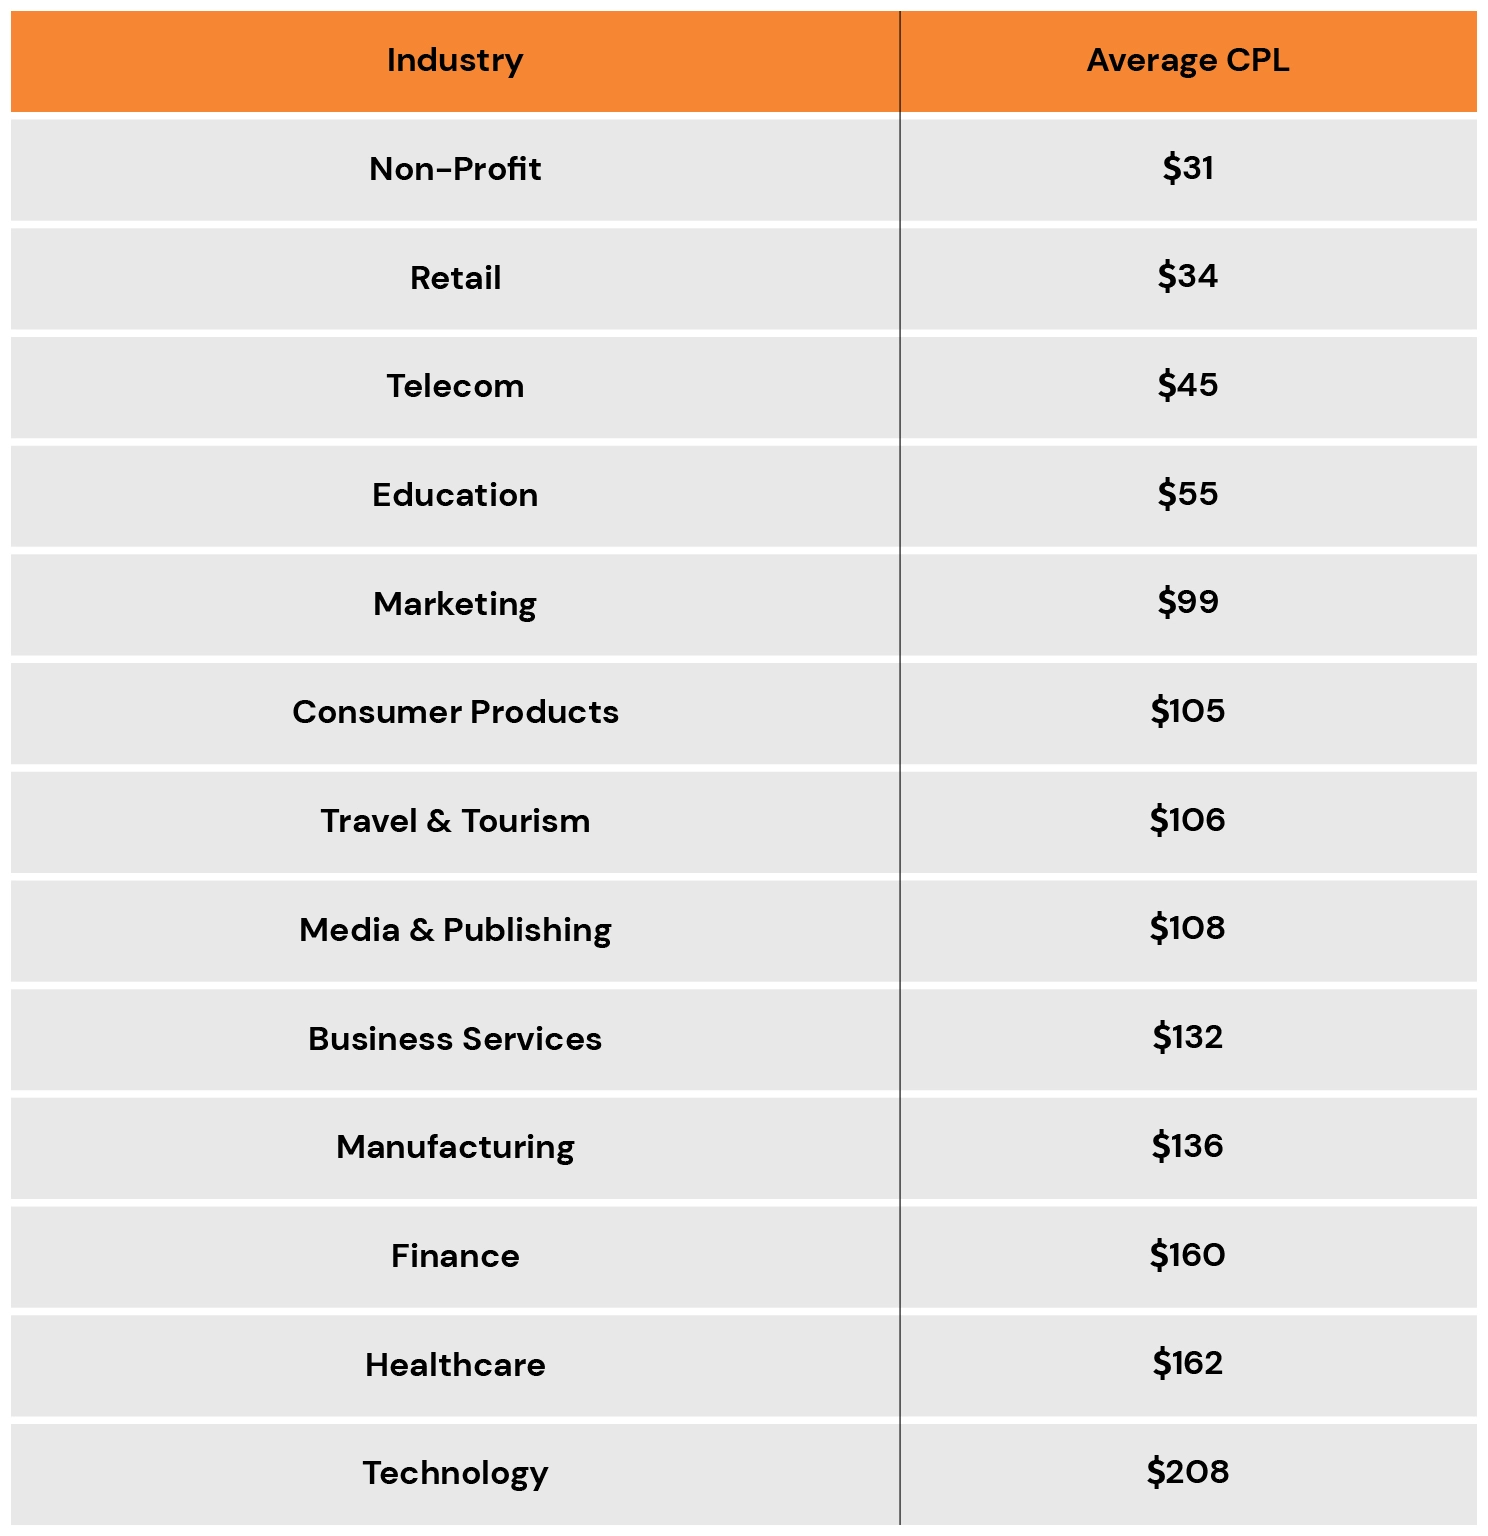 Industry wise Average Cost Per Lead